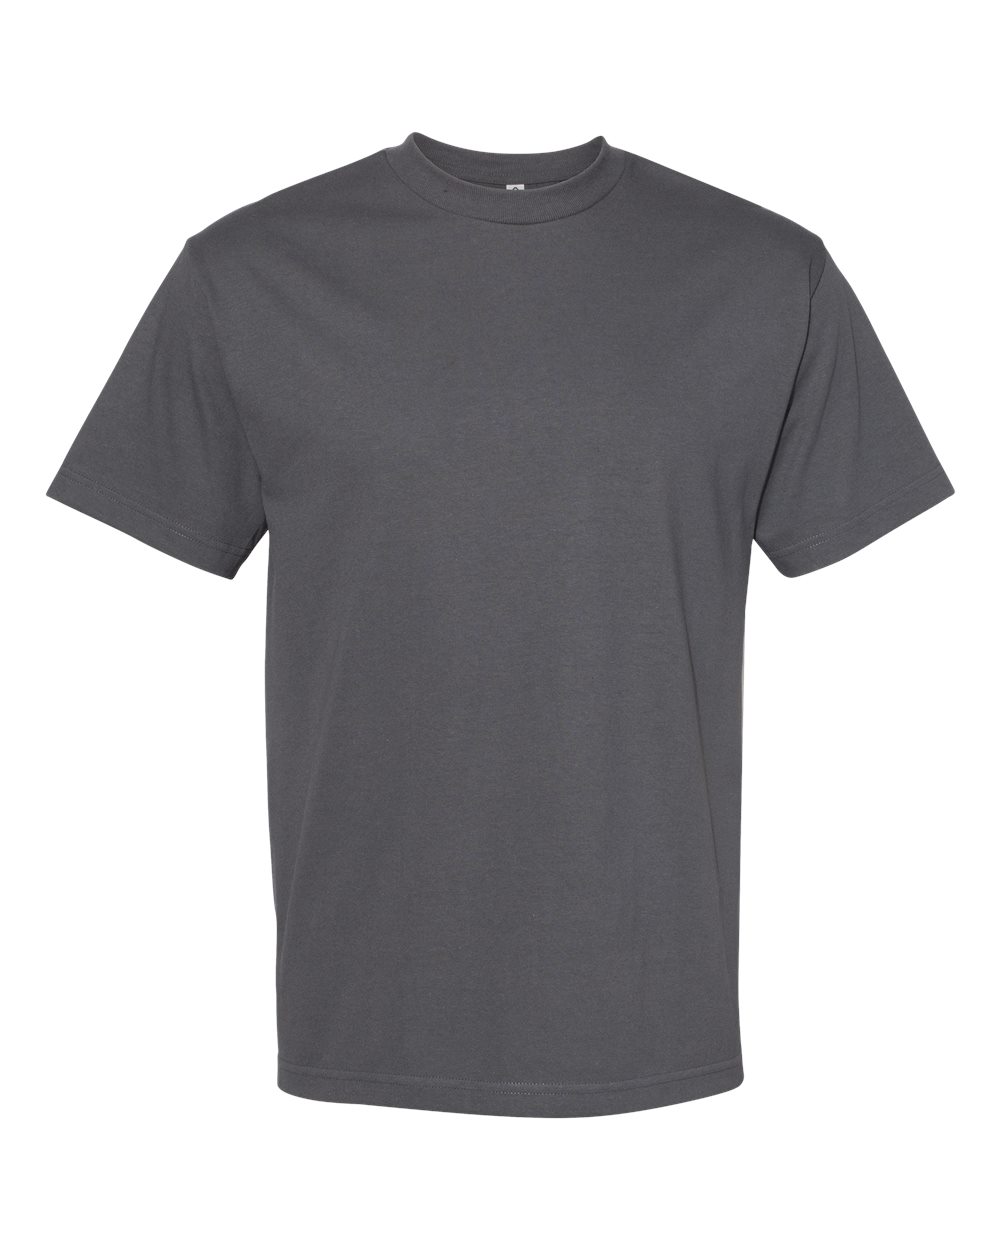 Pretreated American Apparel 1301 Heavy Cotton Tee - Charcoal